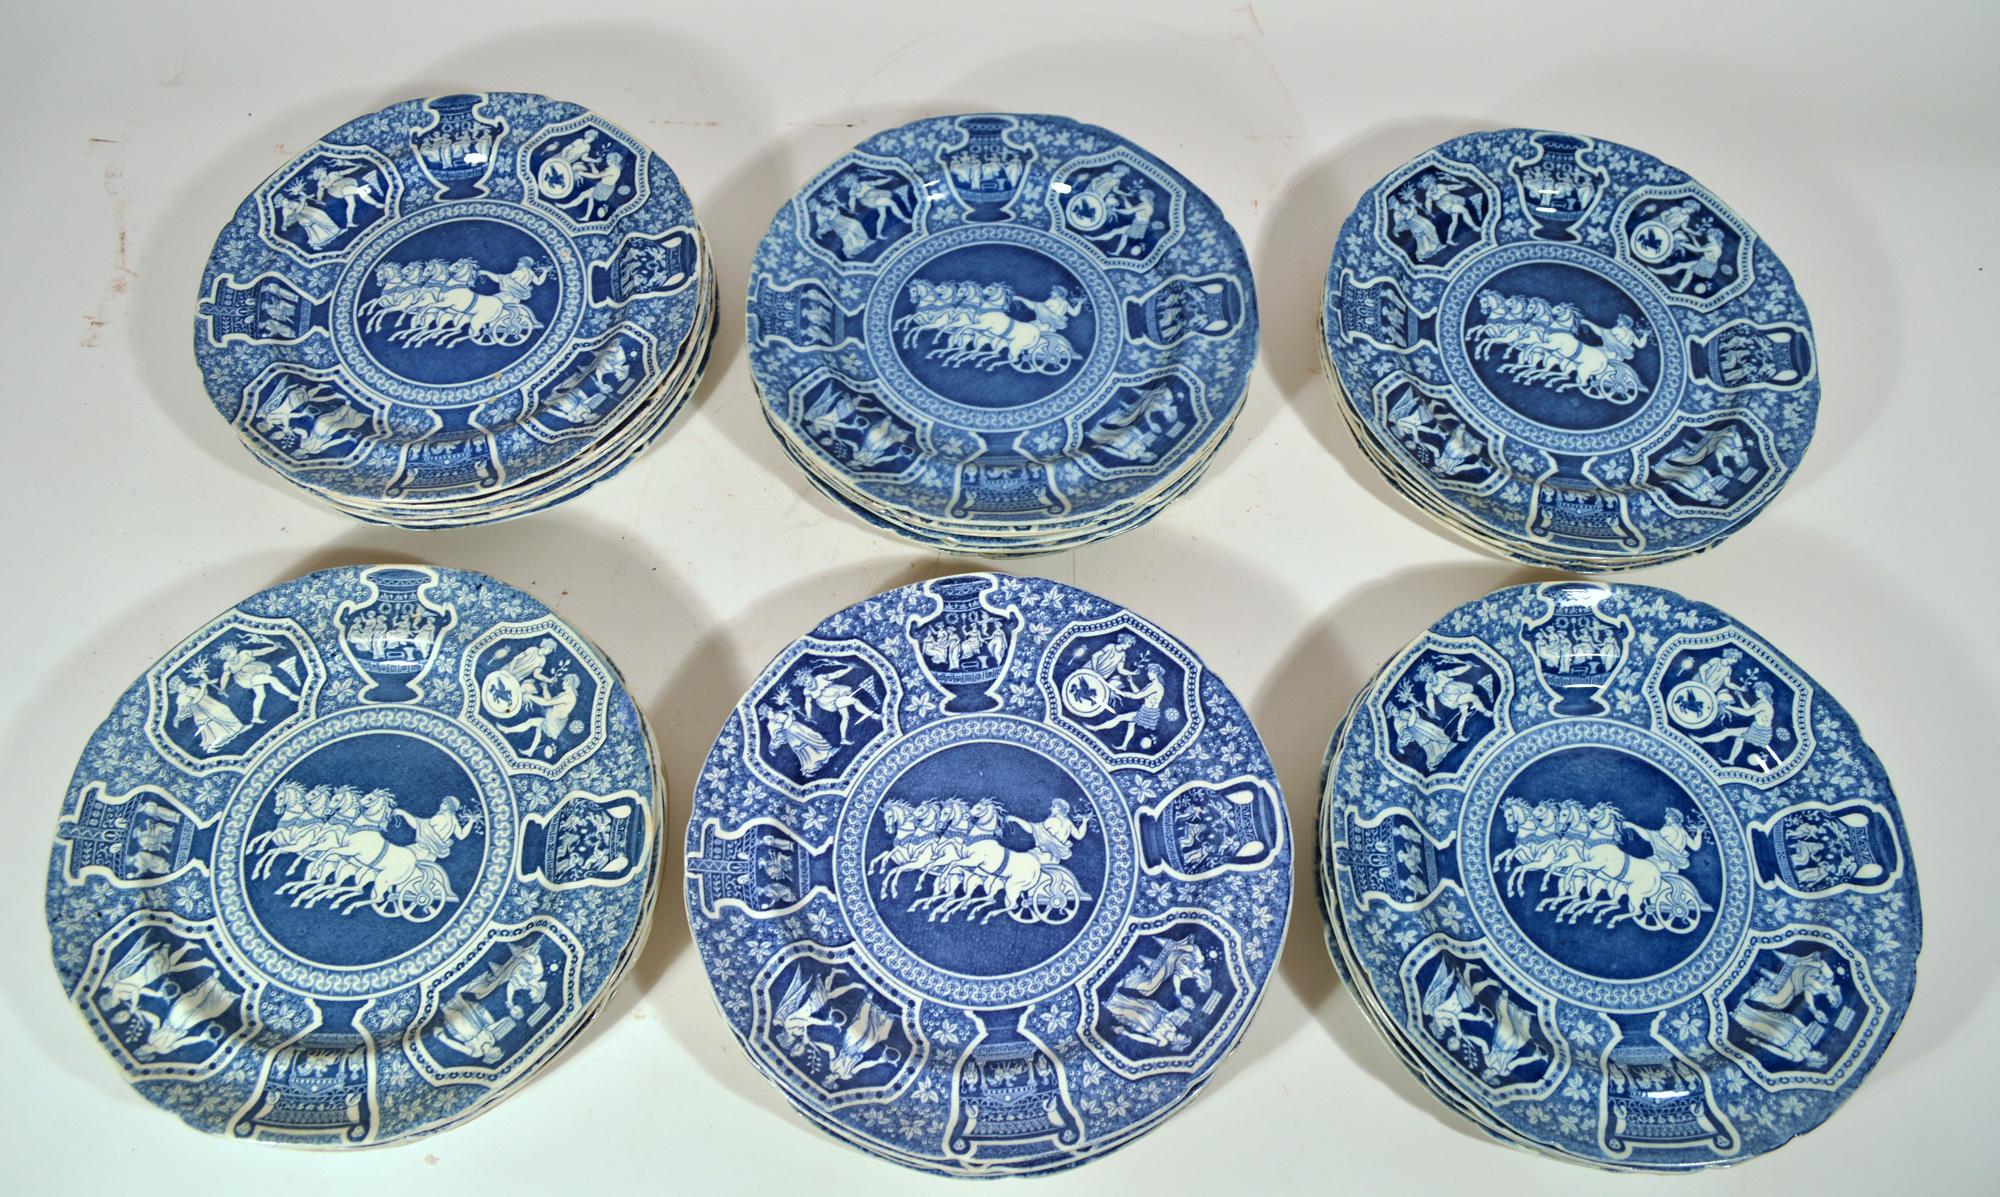 Spode Pottery neo-Classical Greek Pattern blue set of dinner plates-33 plates
Zeus in His Chariot,
Early-19th Century
The Spode pottery underglaze blue Greek pattern has a central design of Zeus in His Chariot with urns and shaped panels with